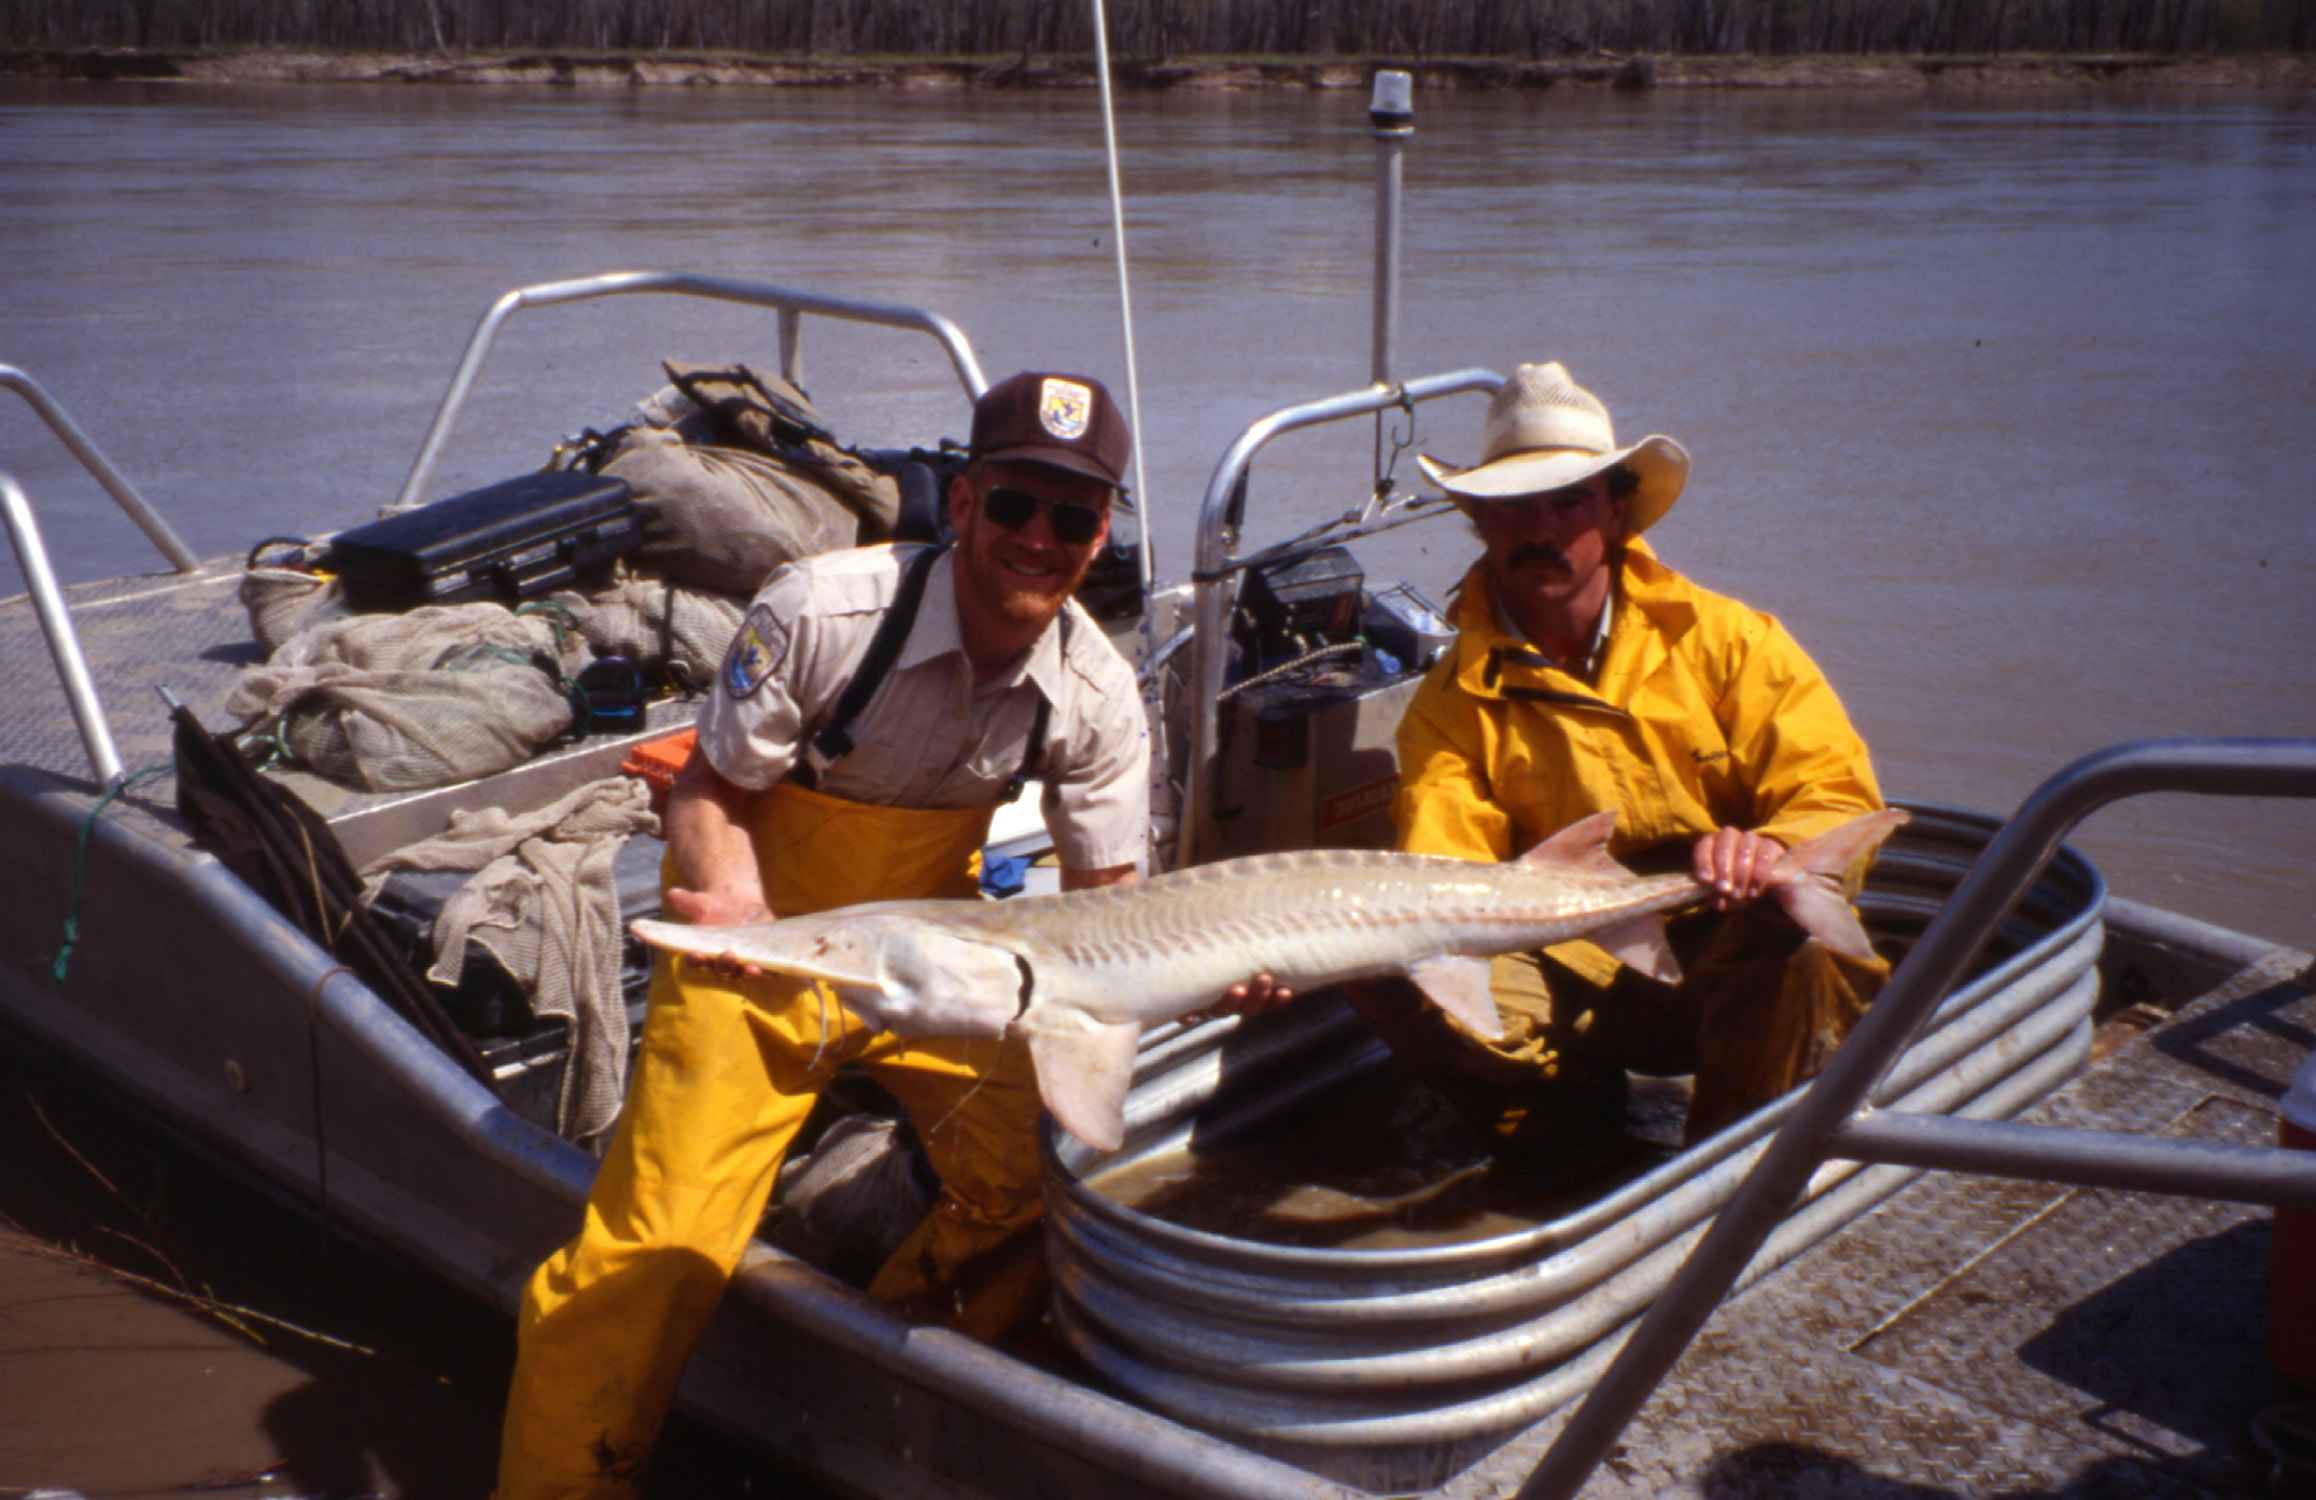 https://pixnio.com/free-images/sport/fishing-and-hunting/two-men-in-a-boat-holding-a-pallid-sturgeon-fish.jpg